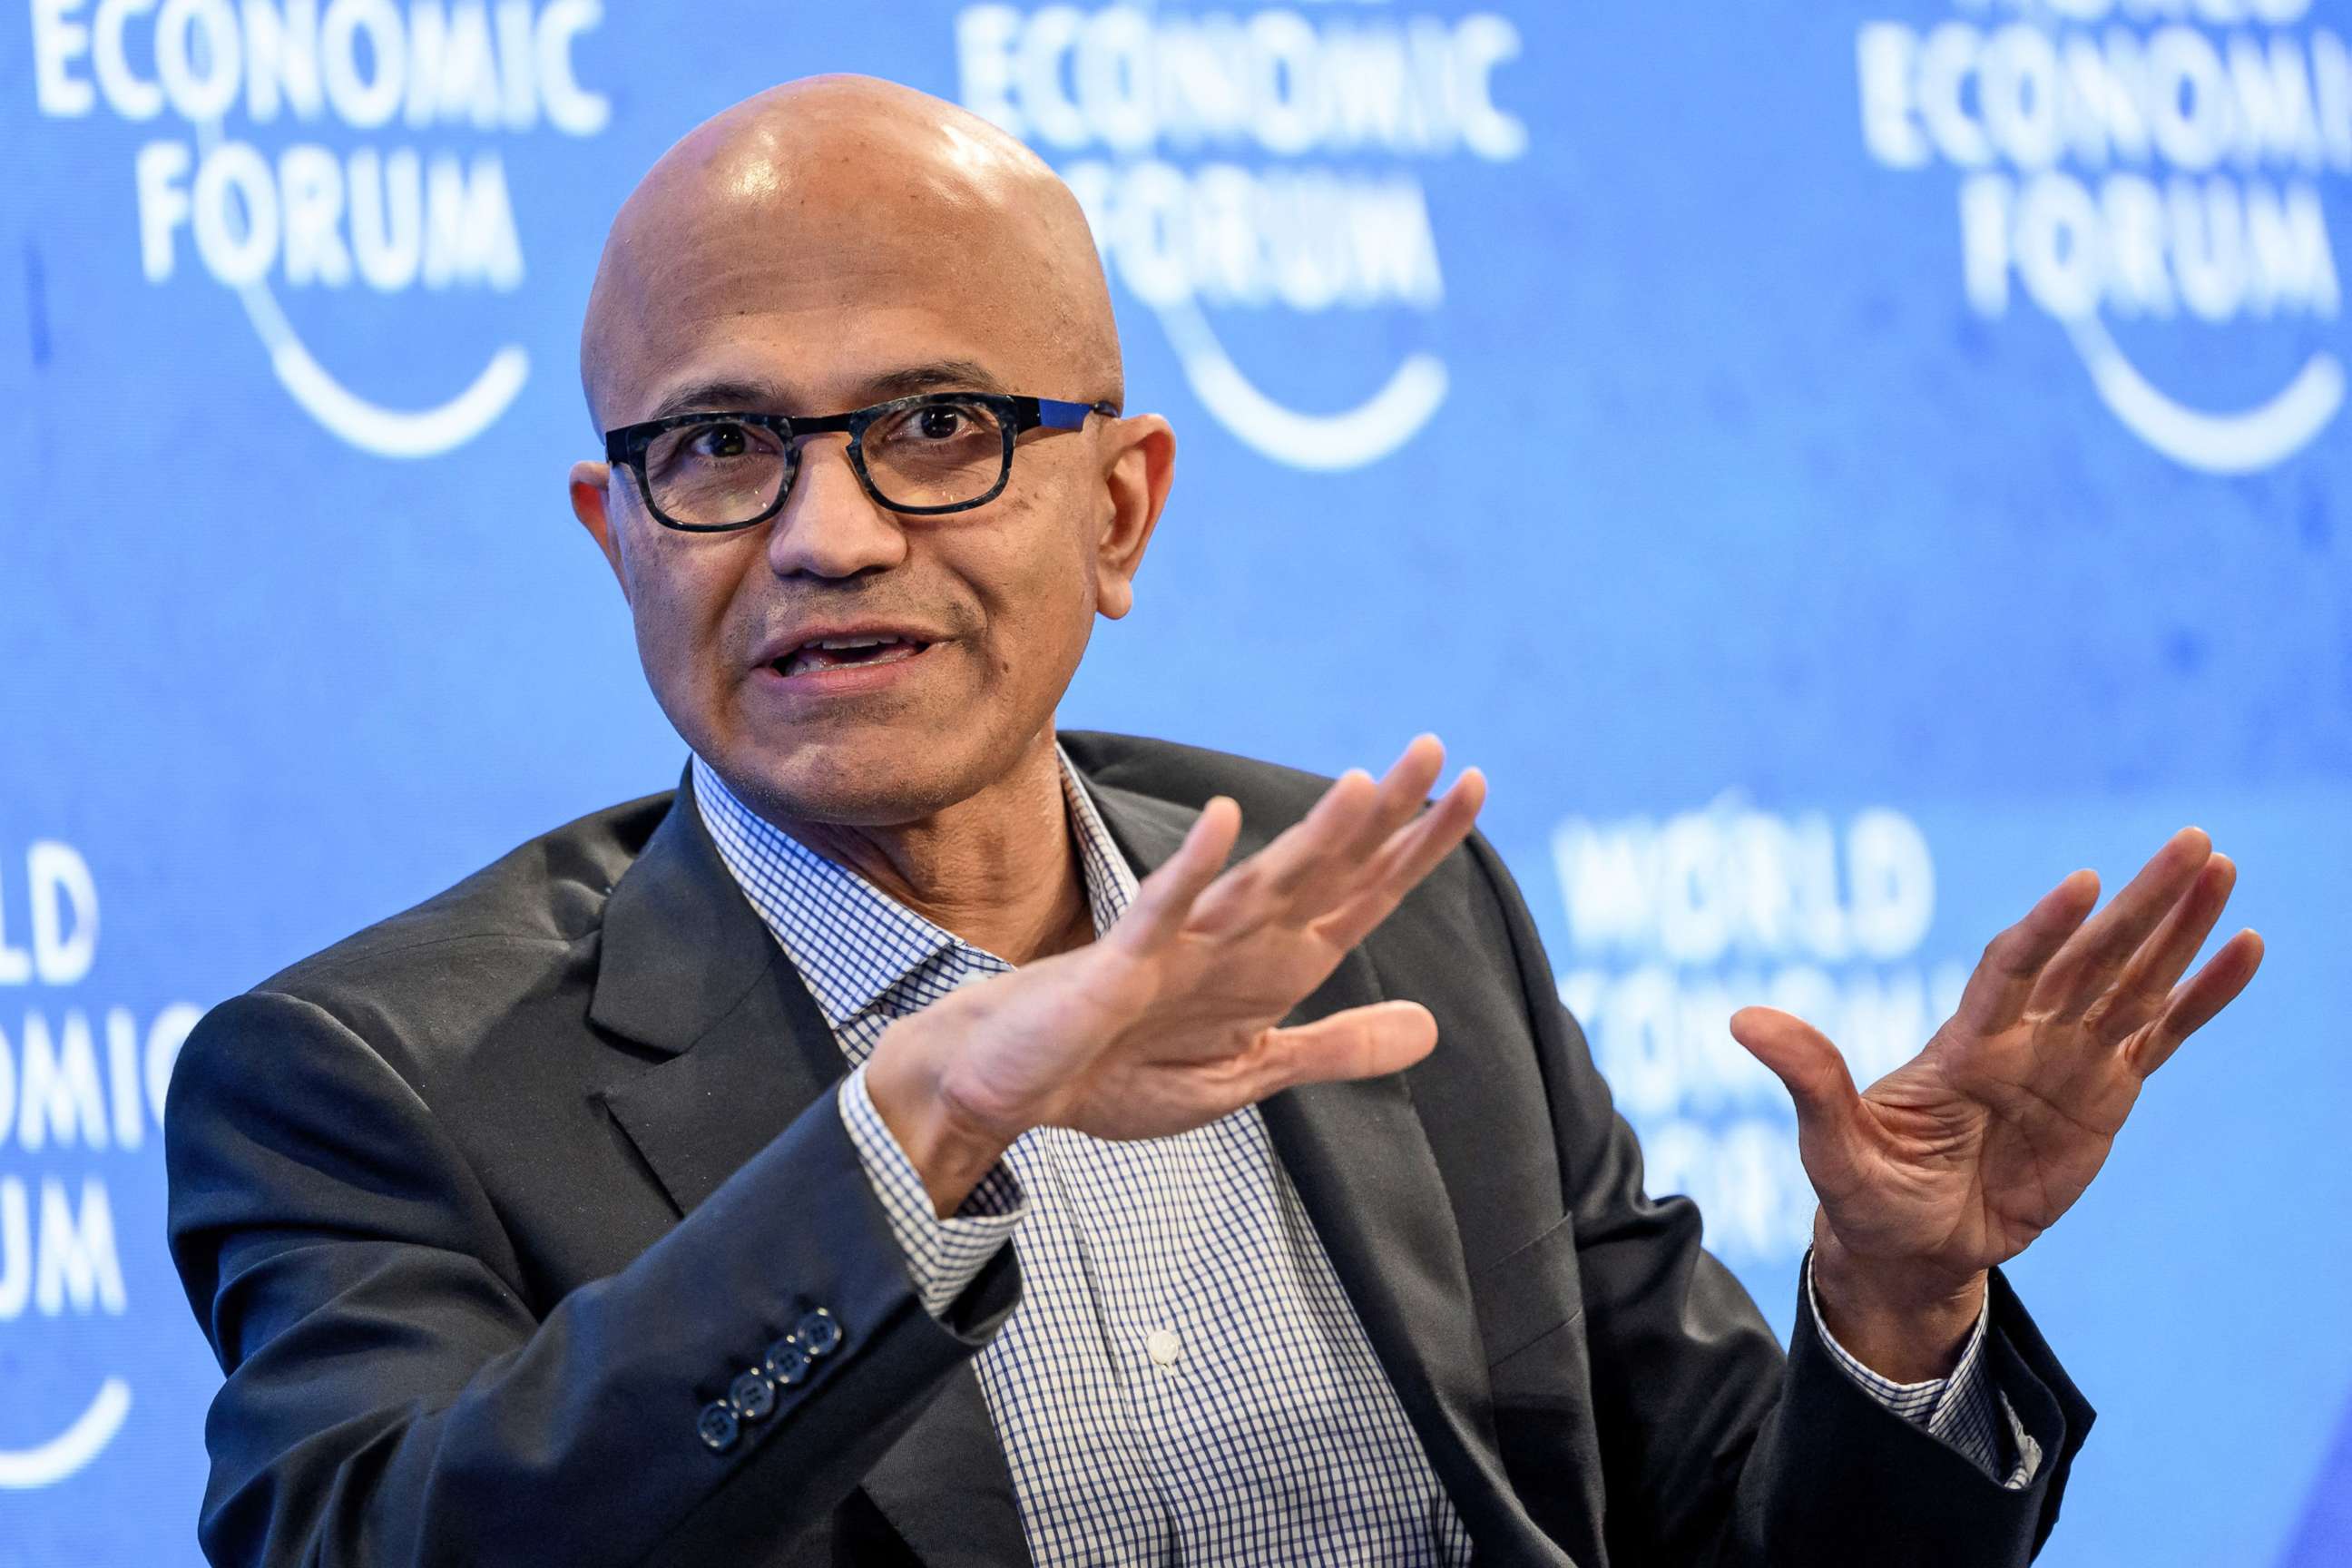 PHOTO: Microsoft CEO Satya Nadella gestures during a session at the World Economic Forum annual meeting in Davos, Switzerland, on May 24, 2022.